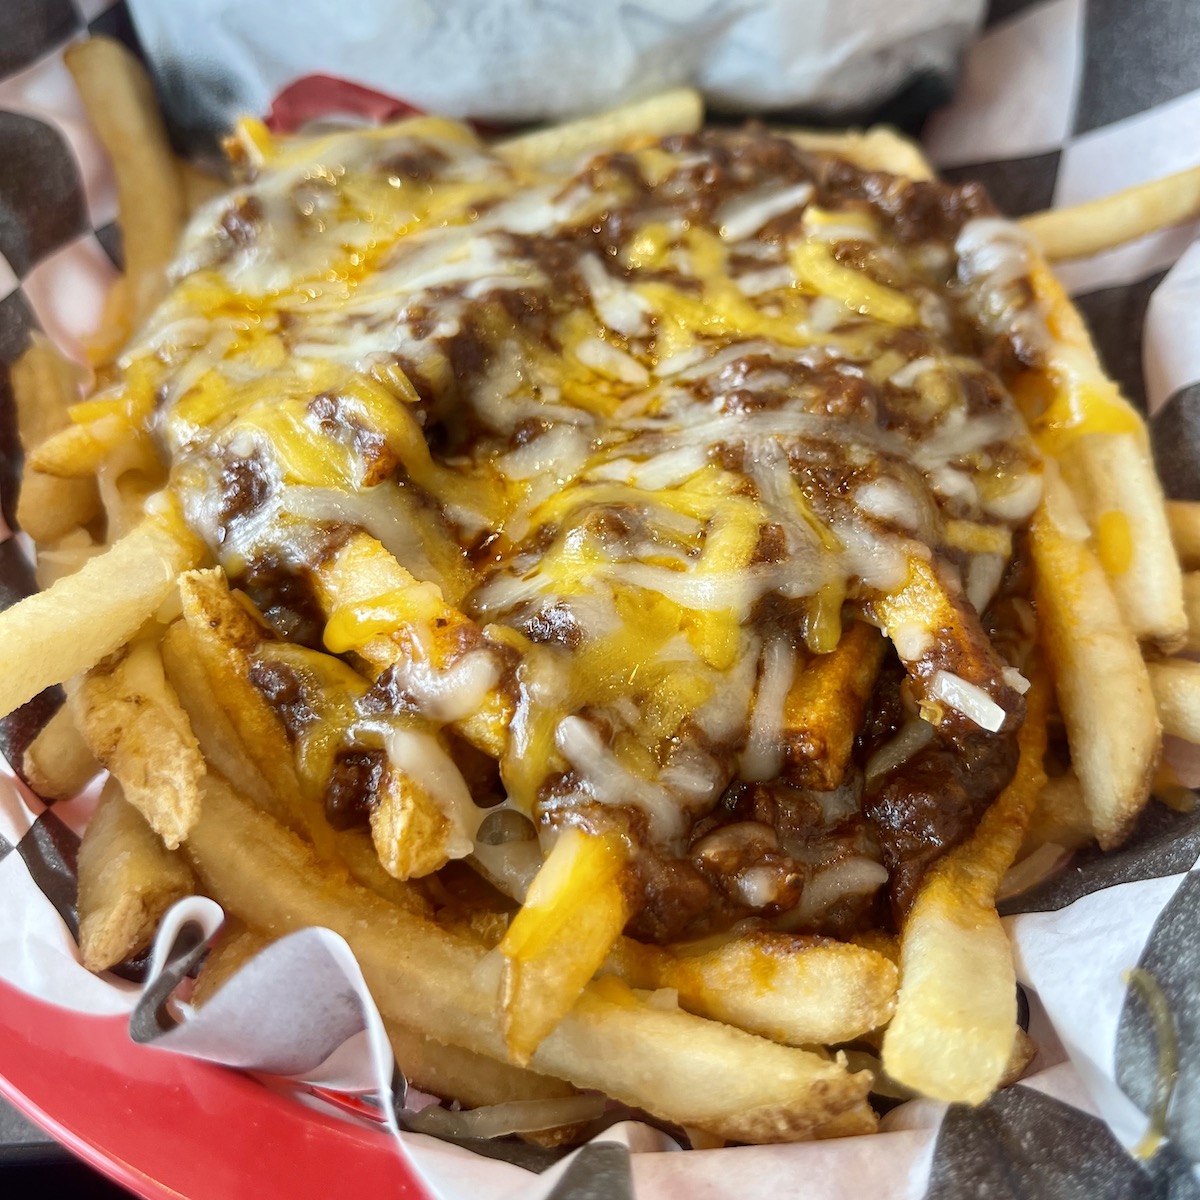 Chili Cheese Fries from Carl's Jr. in Doral, Florida